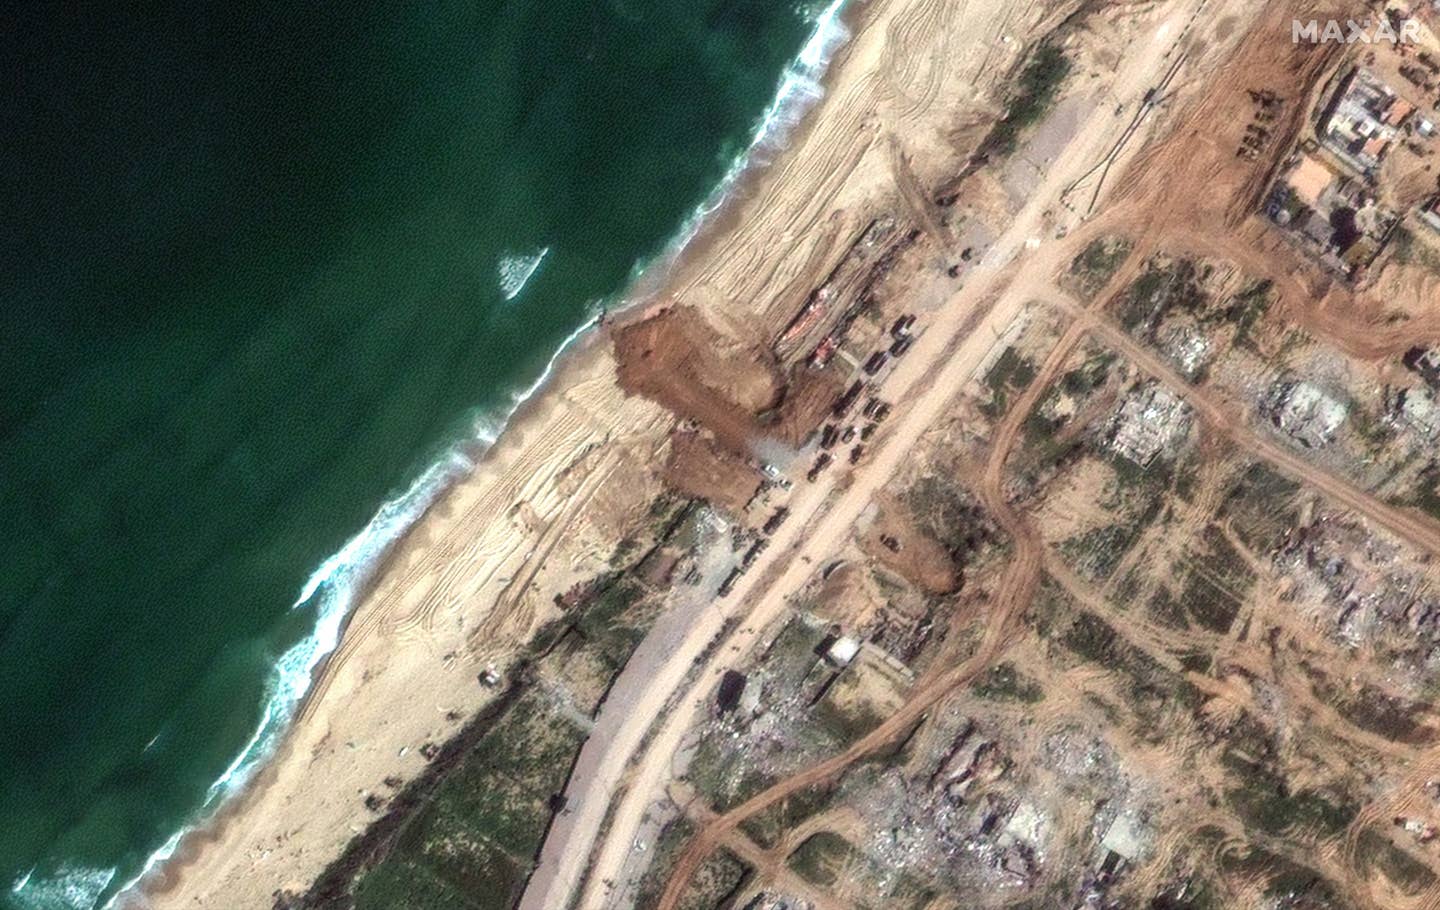 Signs of the early stages of work on the new jetty at the site near Gaza City in a satellite image taken on March 11, 2024. <em>Satellite image ©2024 Maxar Technologies</em>